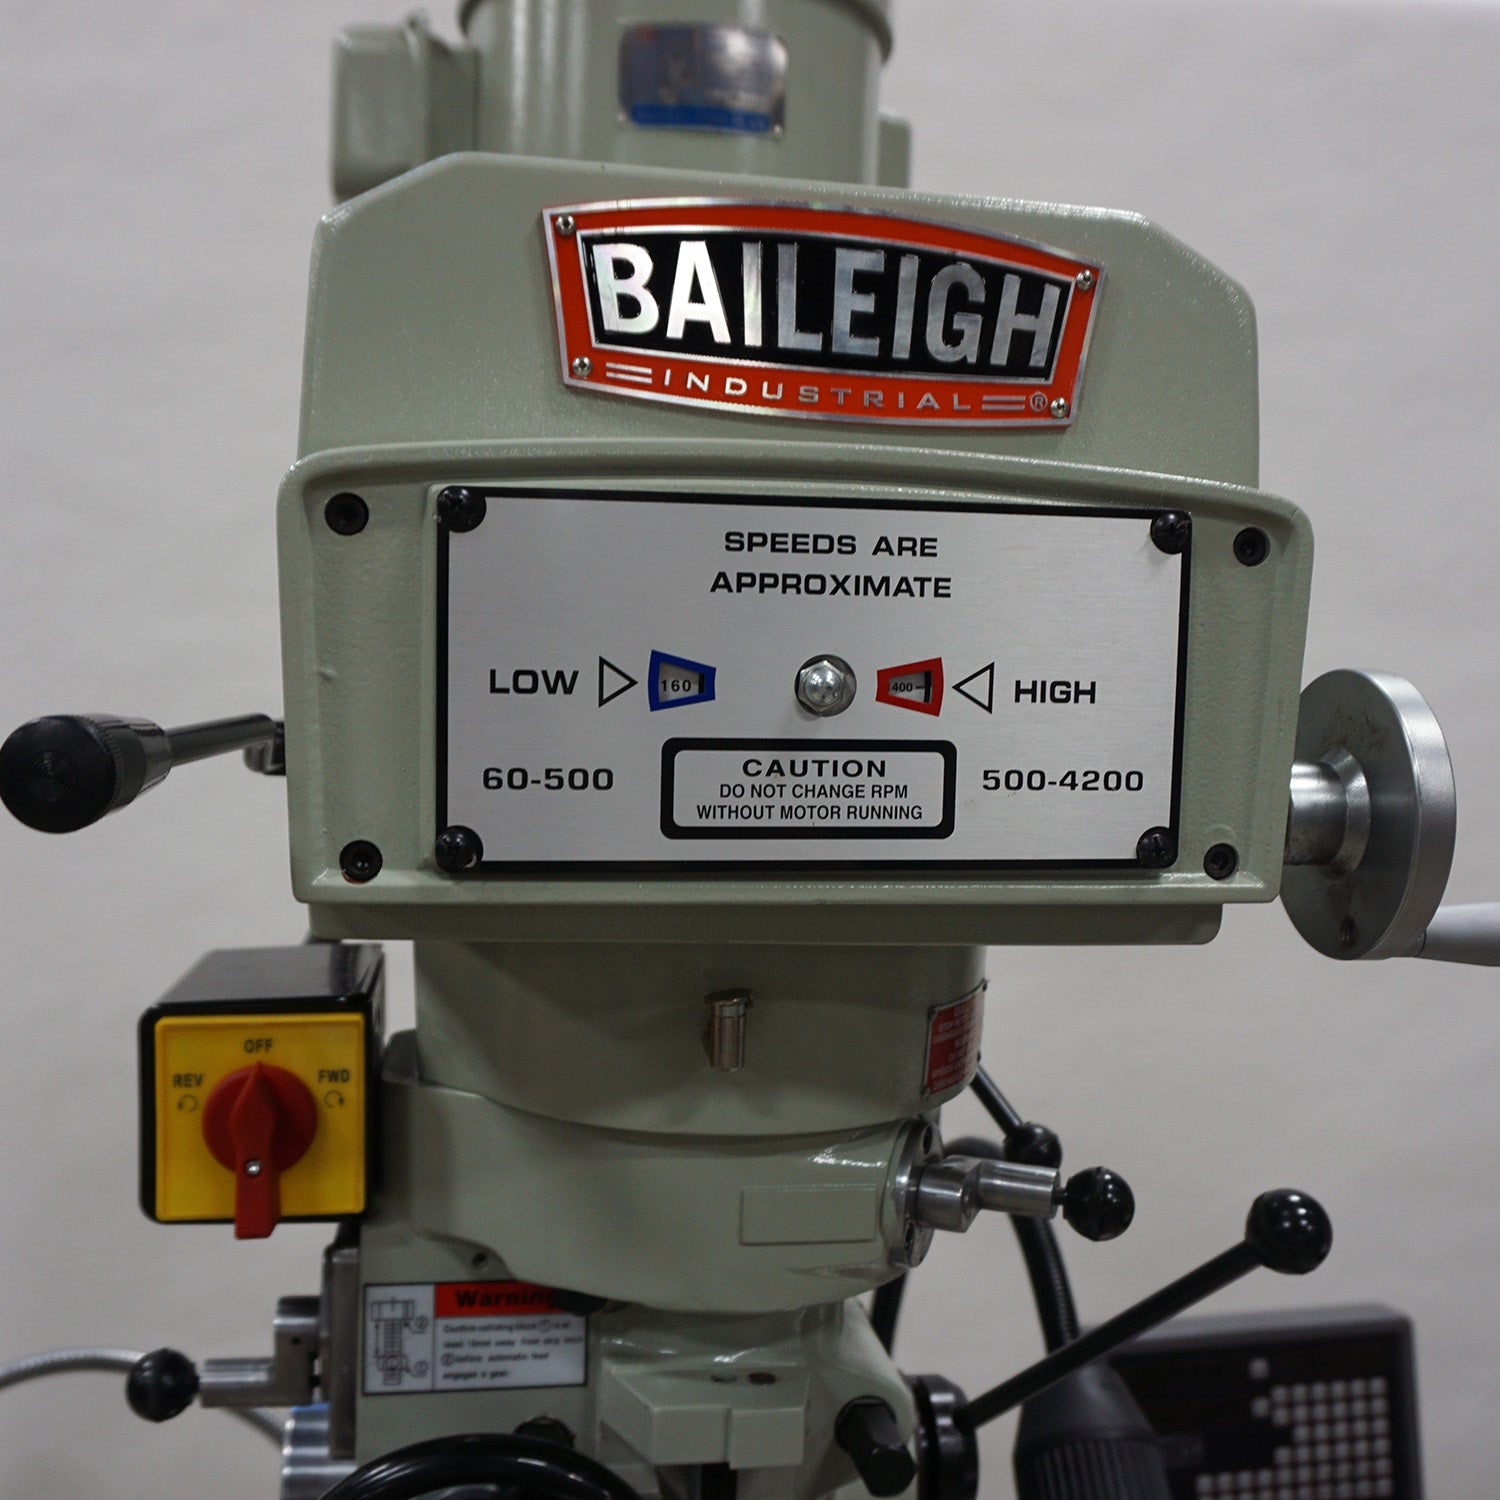 Baileigh VM-949E-VS 220V 1 Phase 3HP Vertical Mill, 9" x 49" Table, Variable Speed Pulley System, X Power Feed, DRO